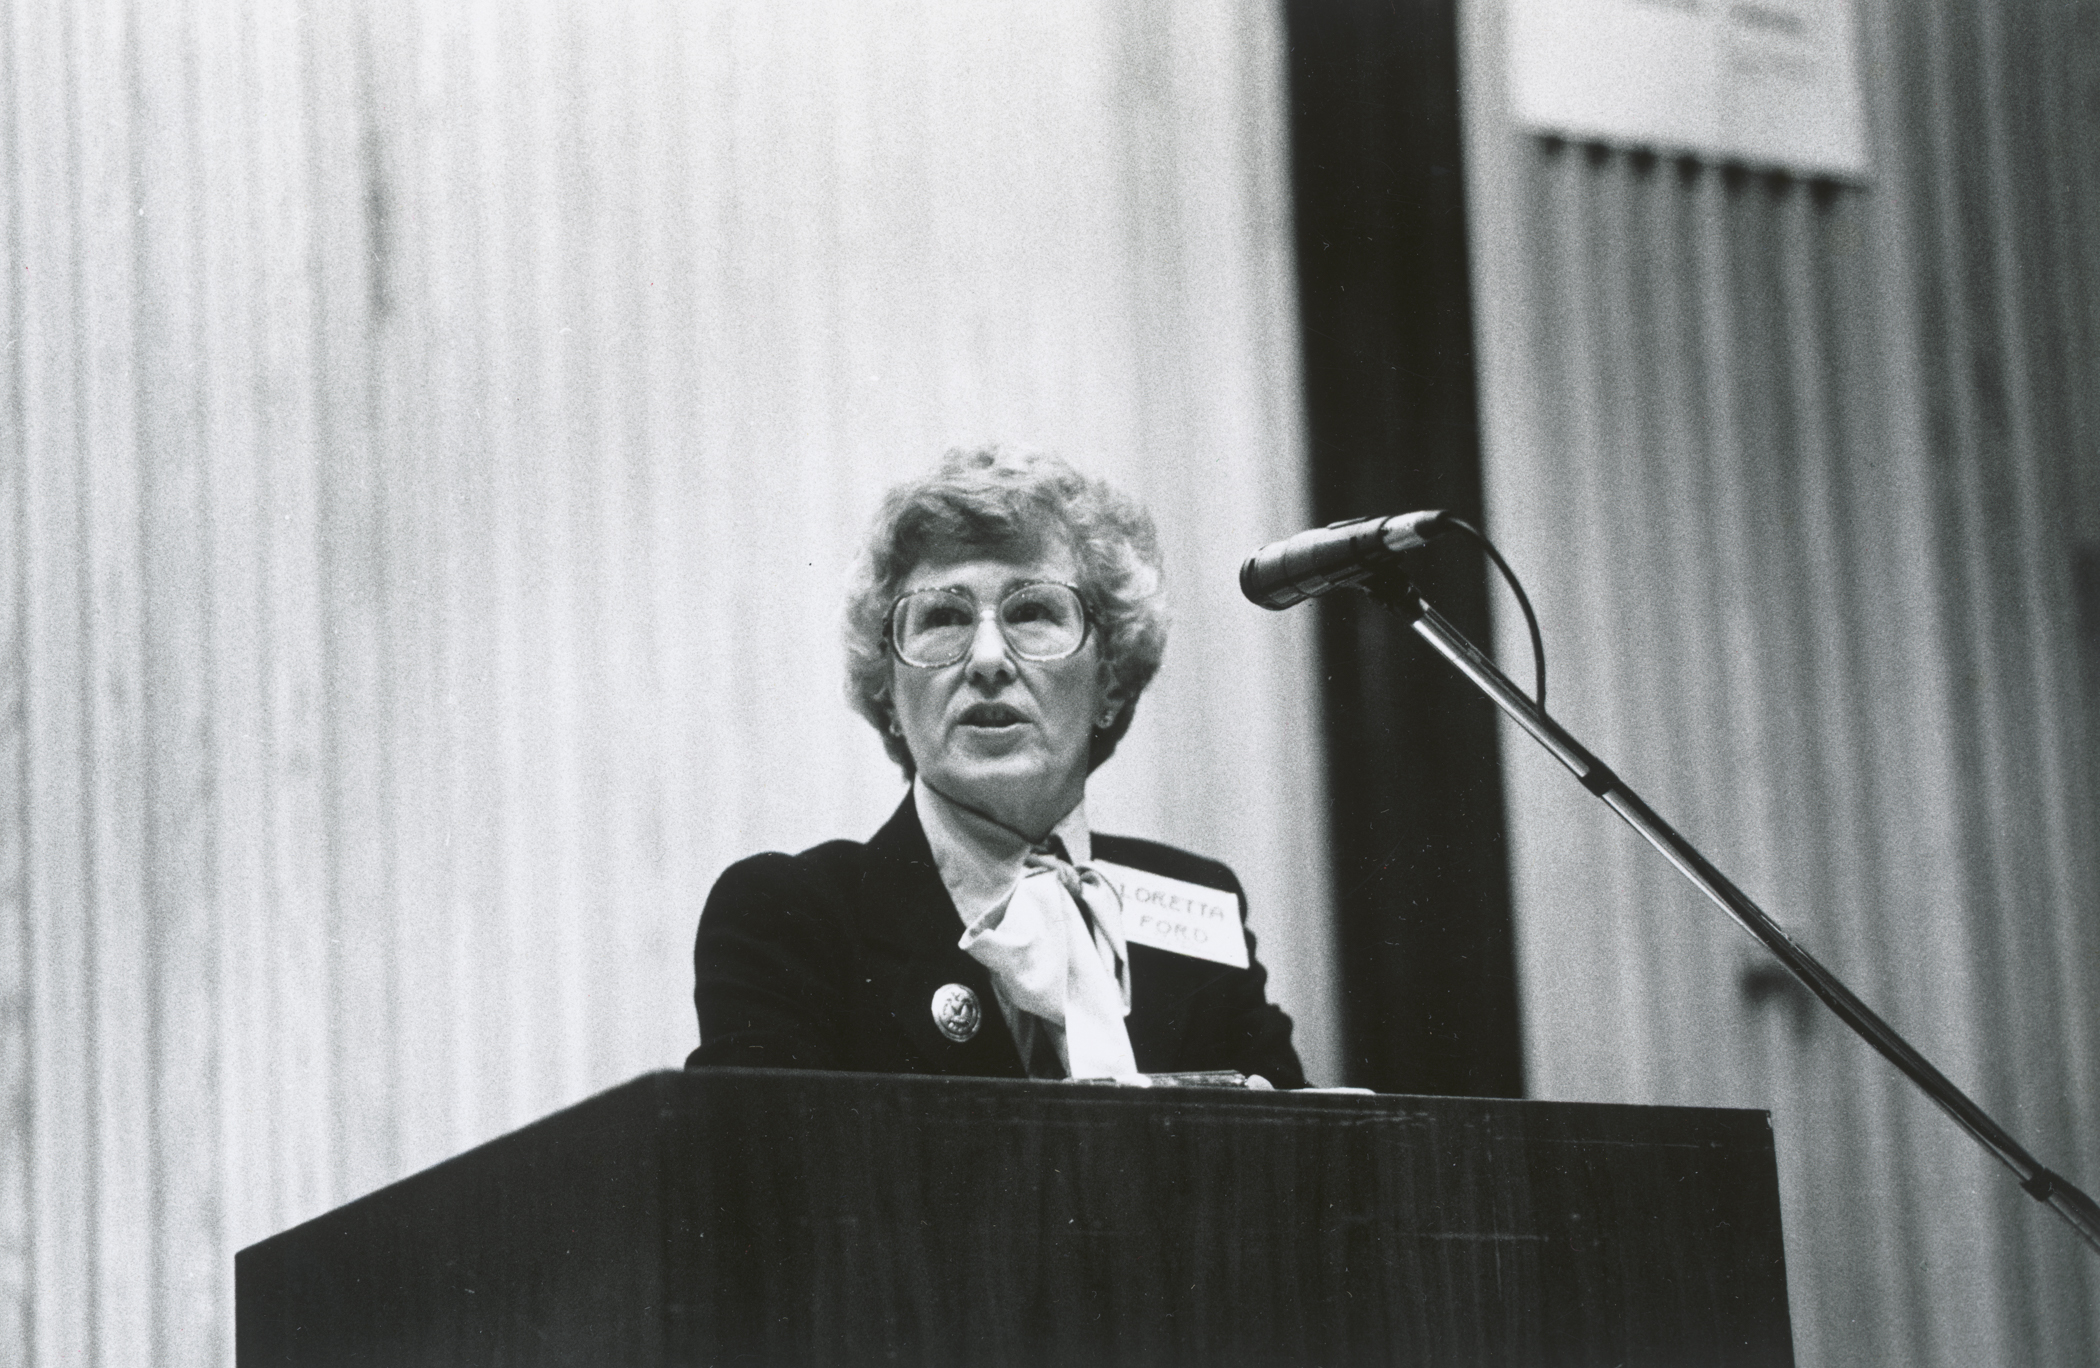 Black and white photo of Loretta Ford speaking at a podium.